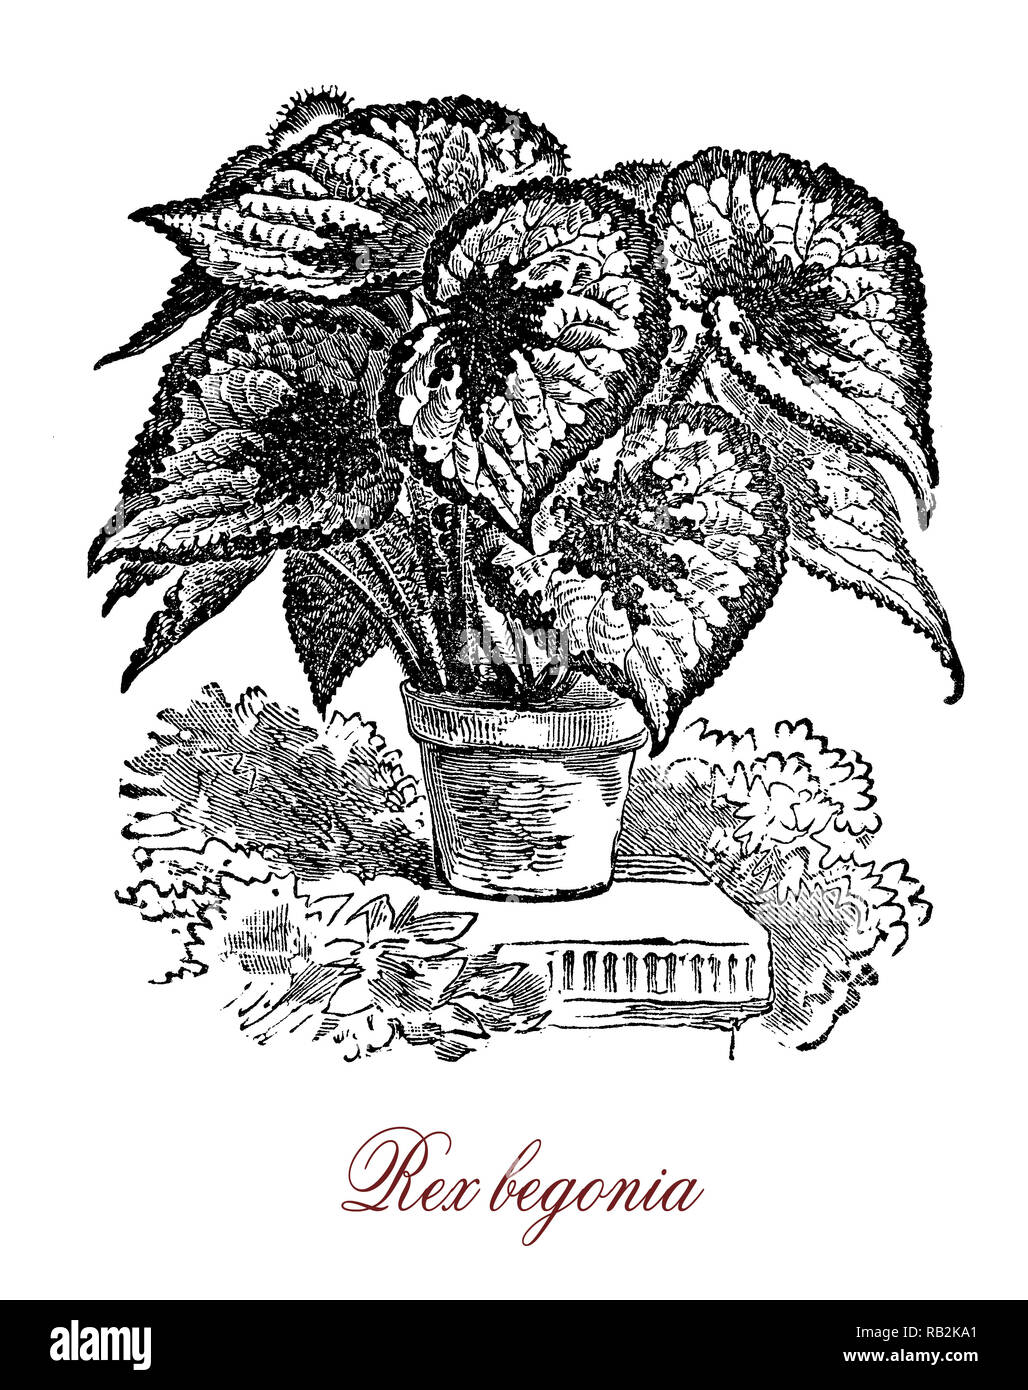 Vintage engraving of begonia rex, popular houseplant grown for the ornamental foliage with bold and striking markings Stock Photo